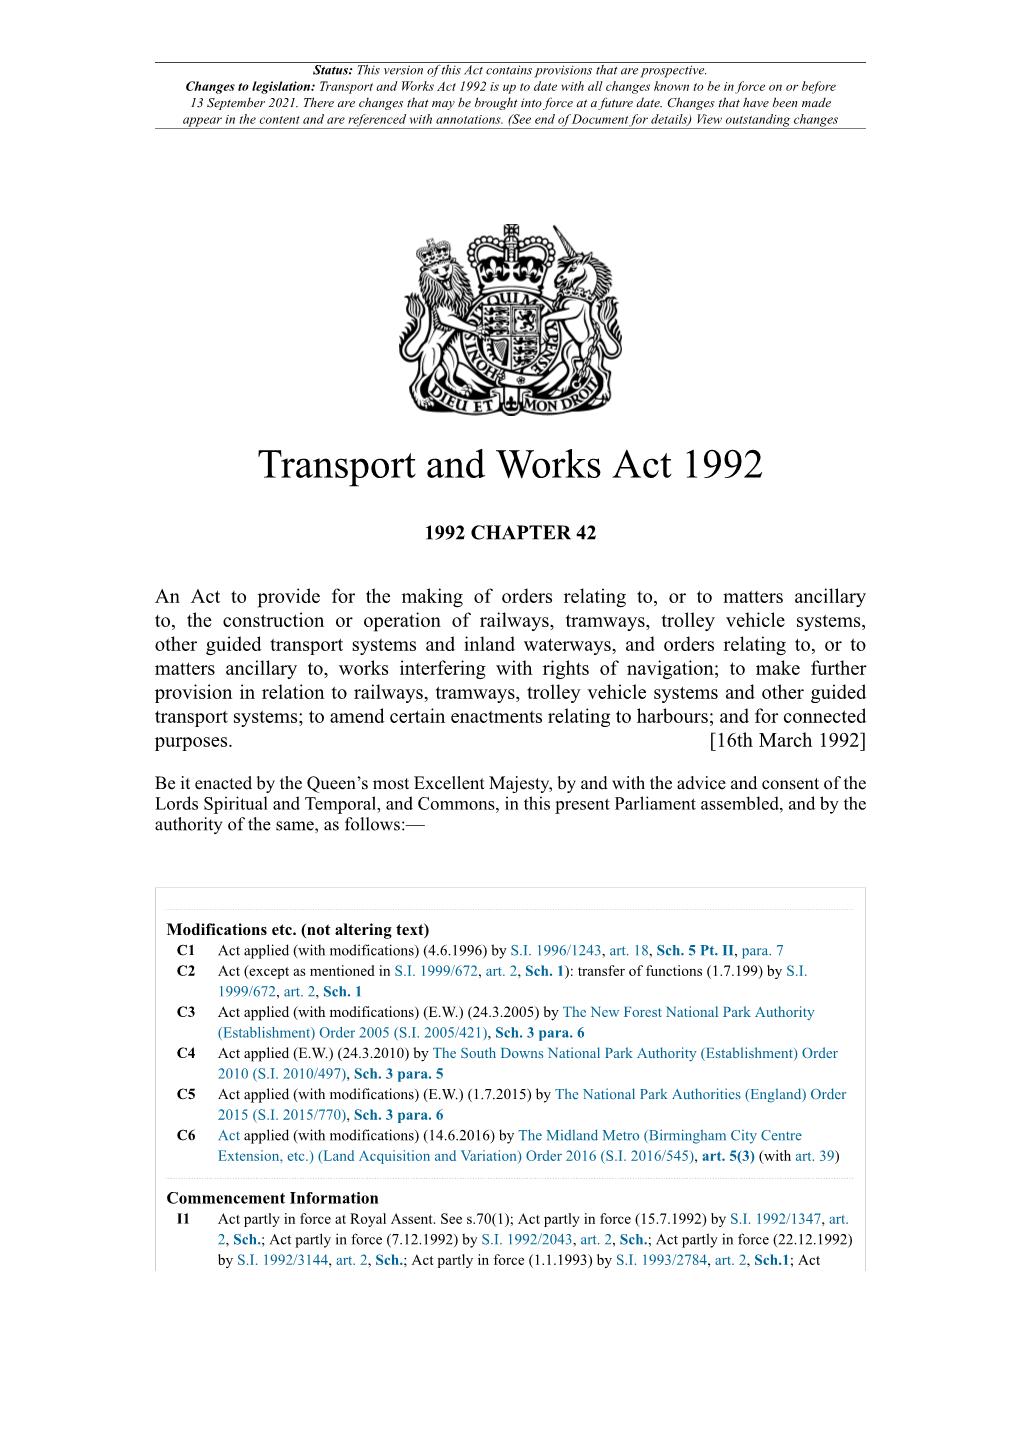 Transport and Works Act 1992 Is up to Date with All Changes Known to Be in Force on Or Before 13 September 2021